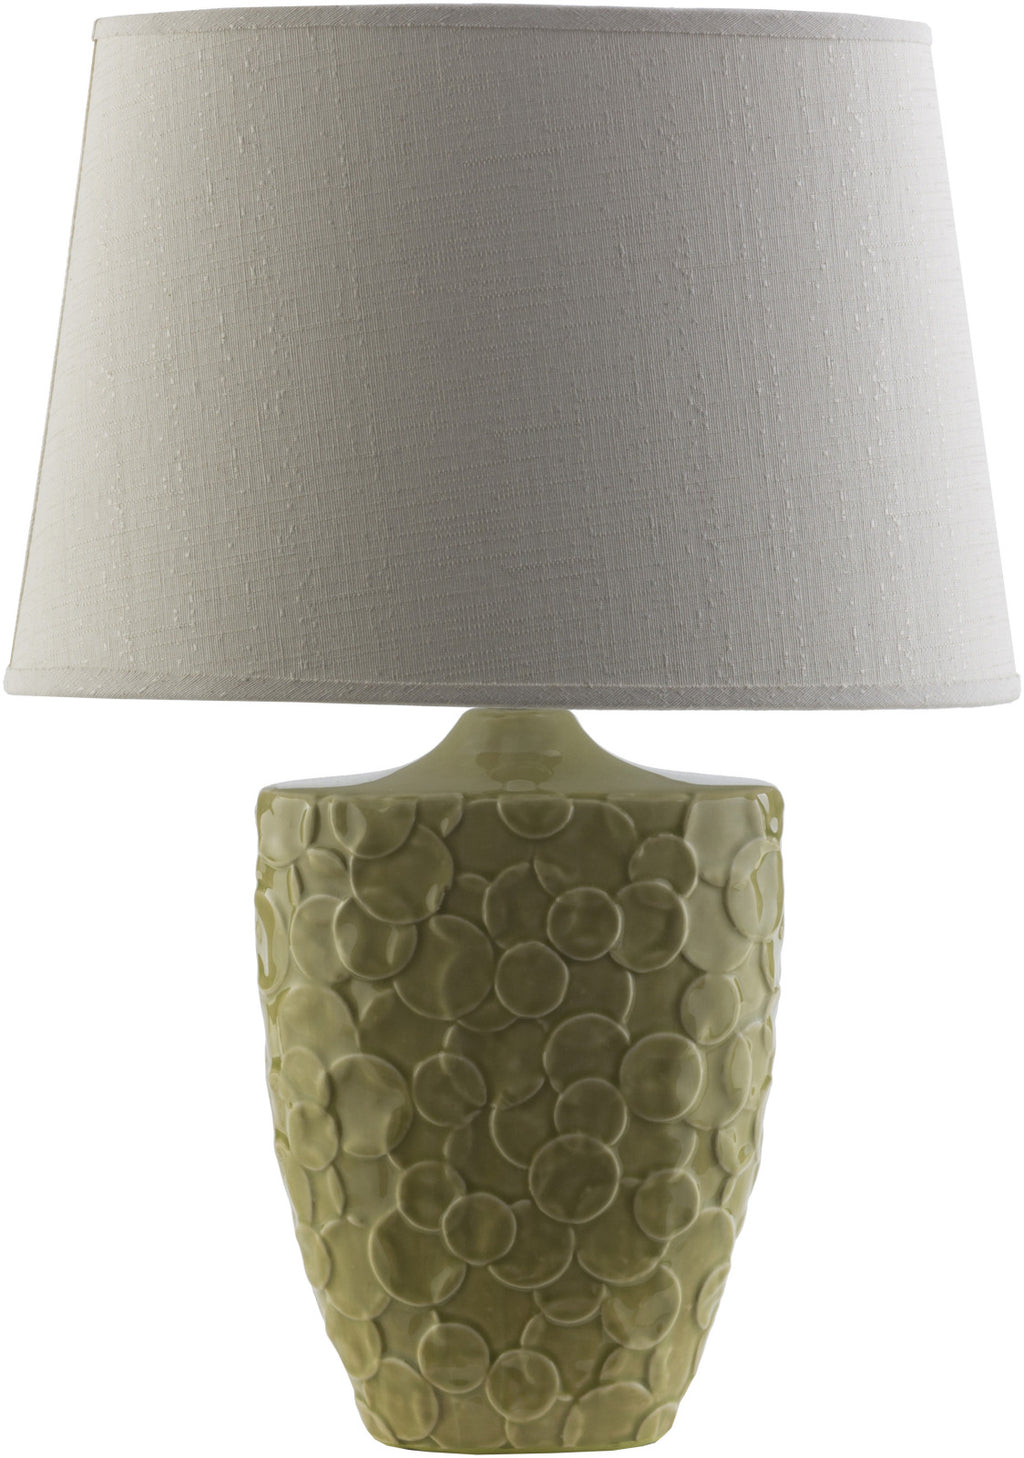 Surya Thistlewood THW-761 Ivory Lamp Table Lamp